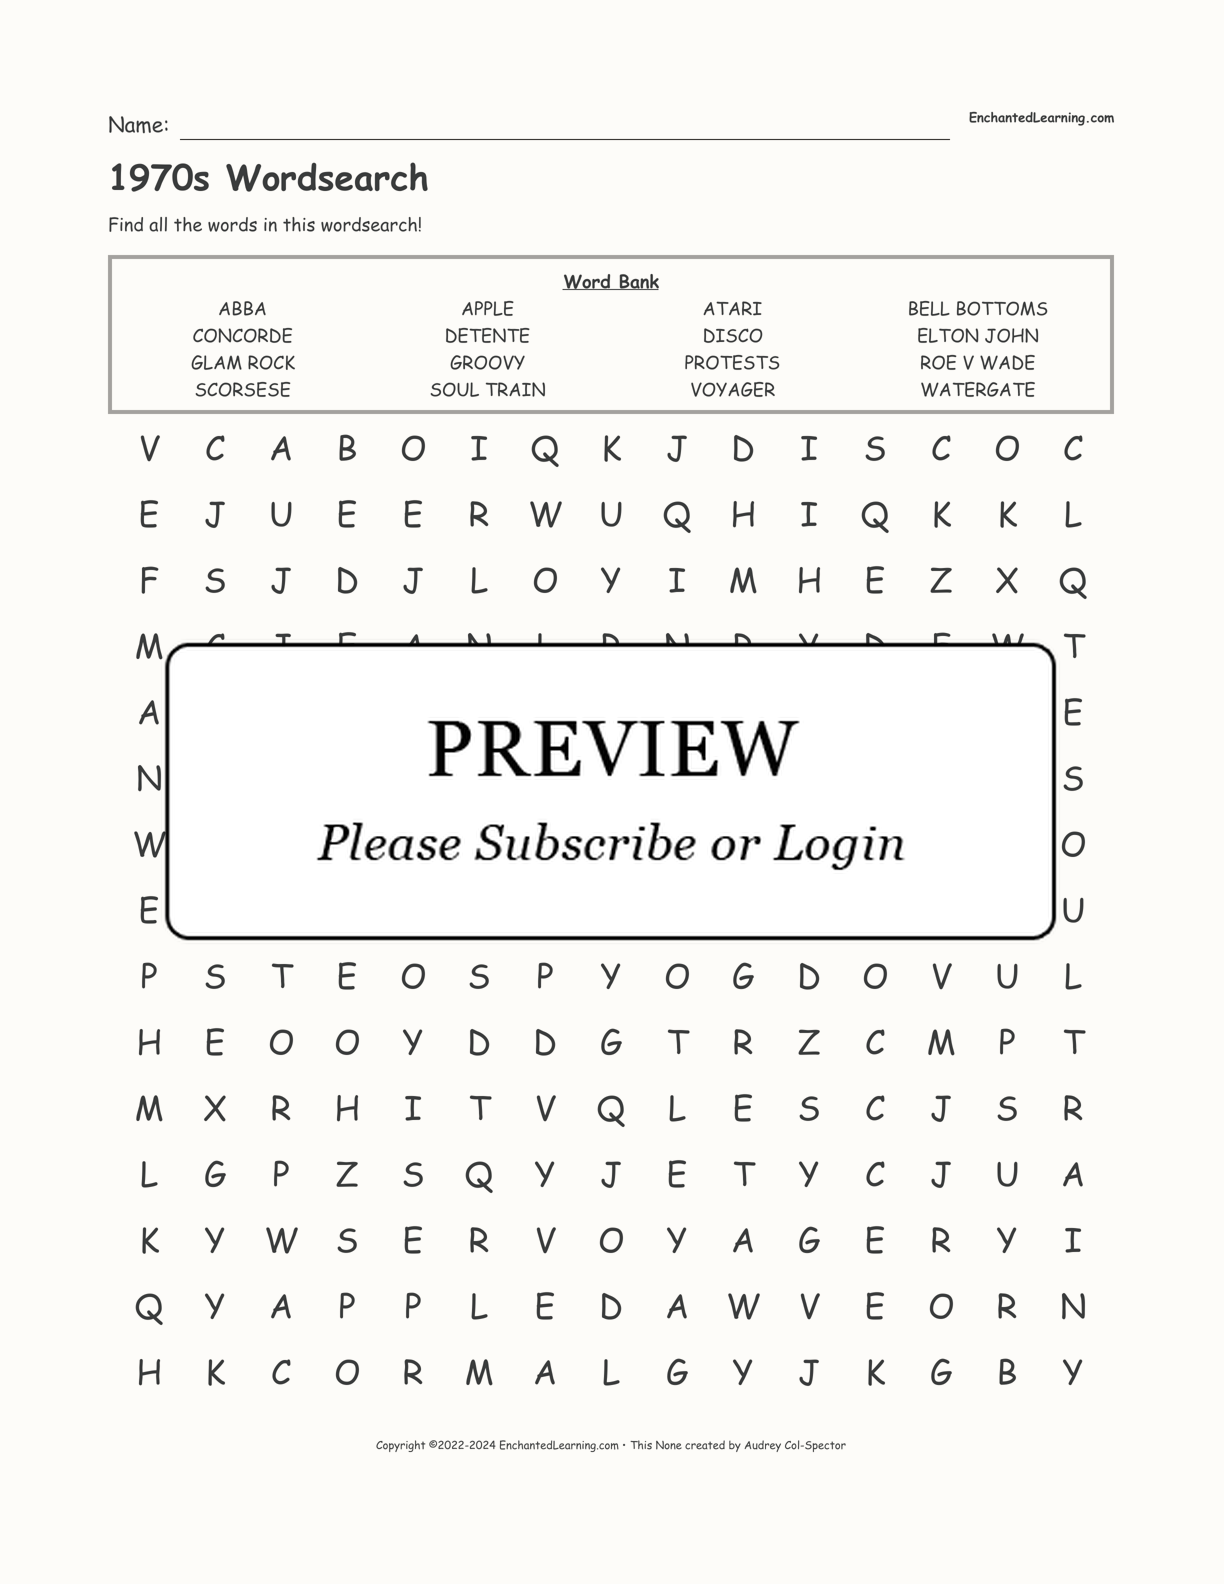 1970s Wordsearch interactive worksheet page 1